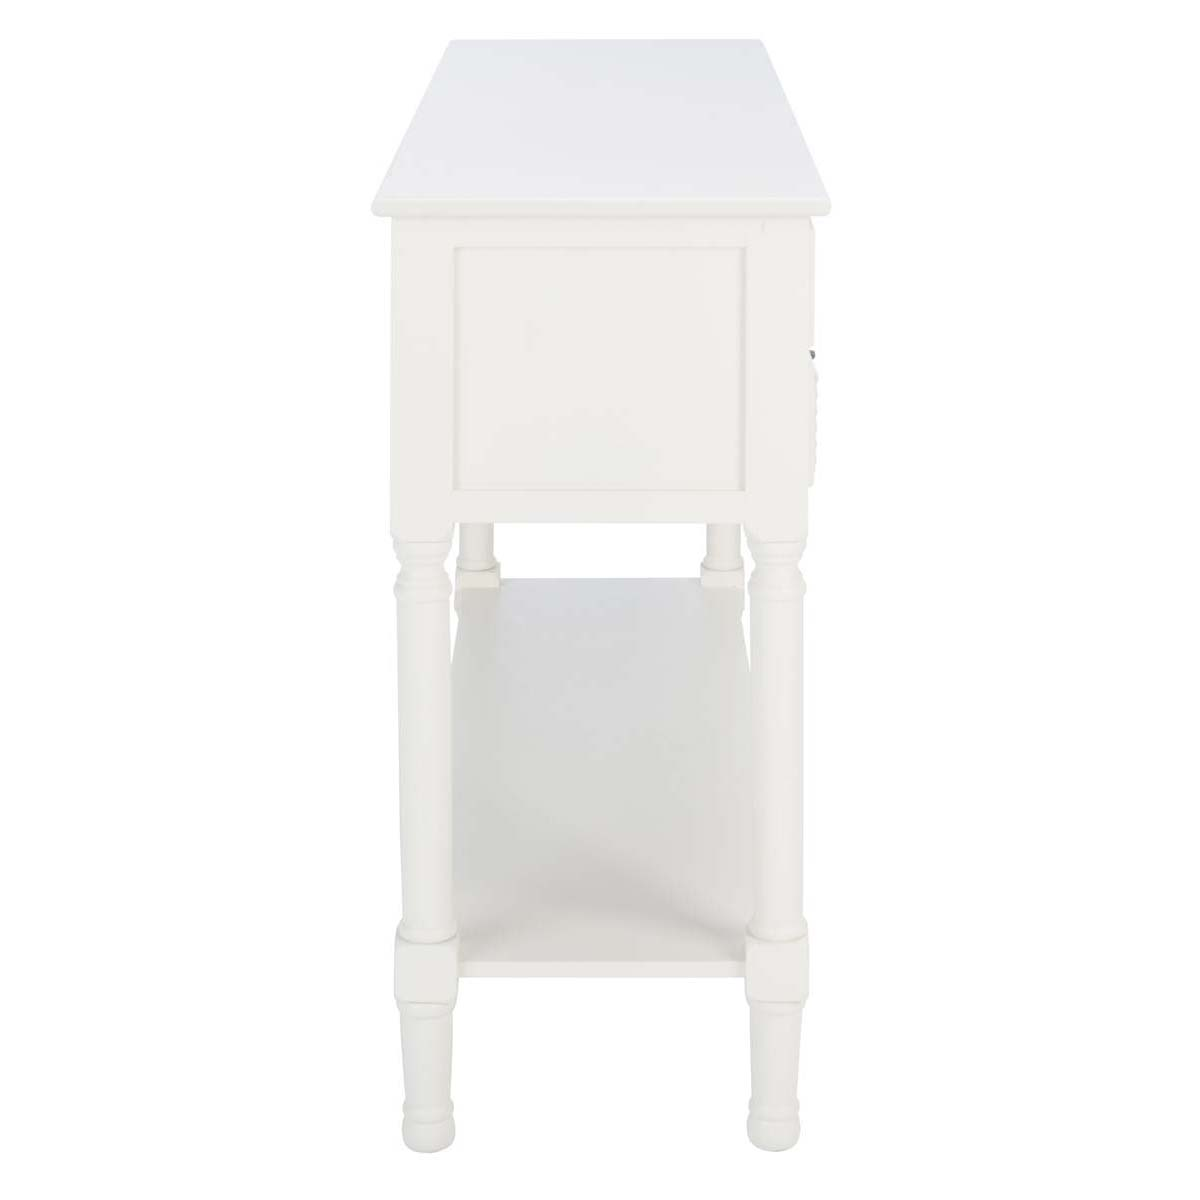 Safavieh Haines 4Drw Console Table, CNS5728 - White